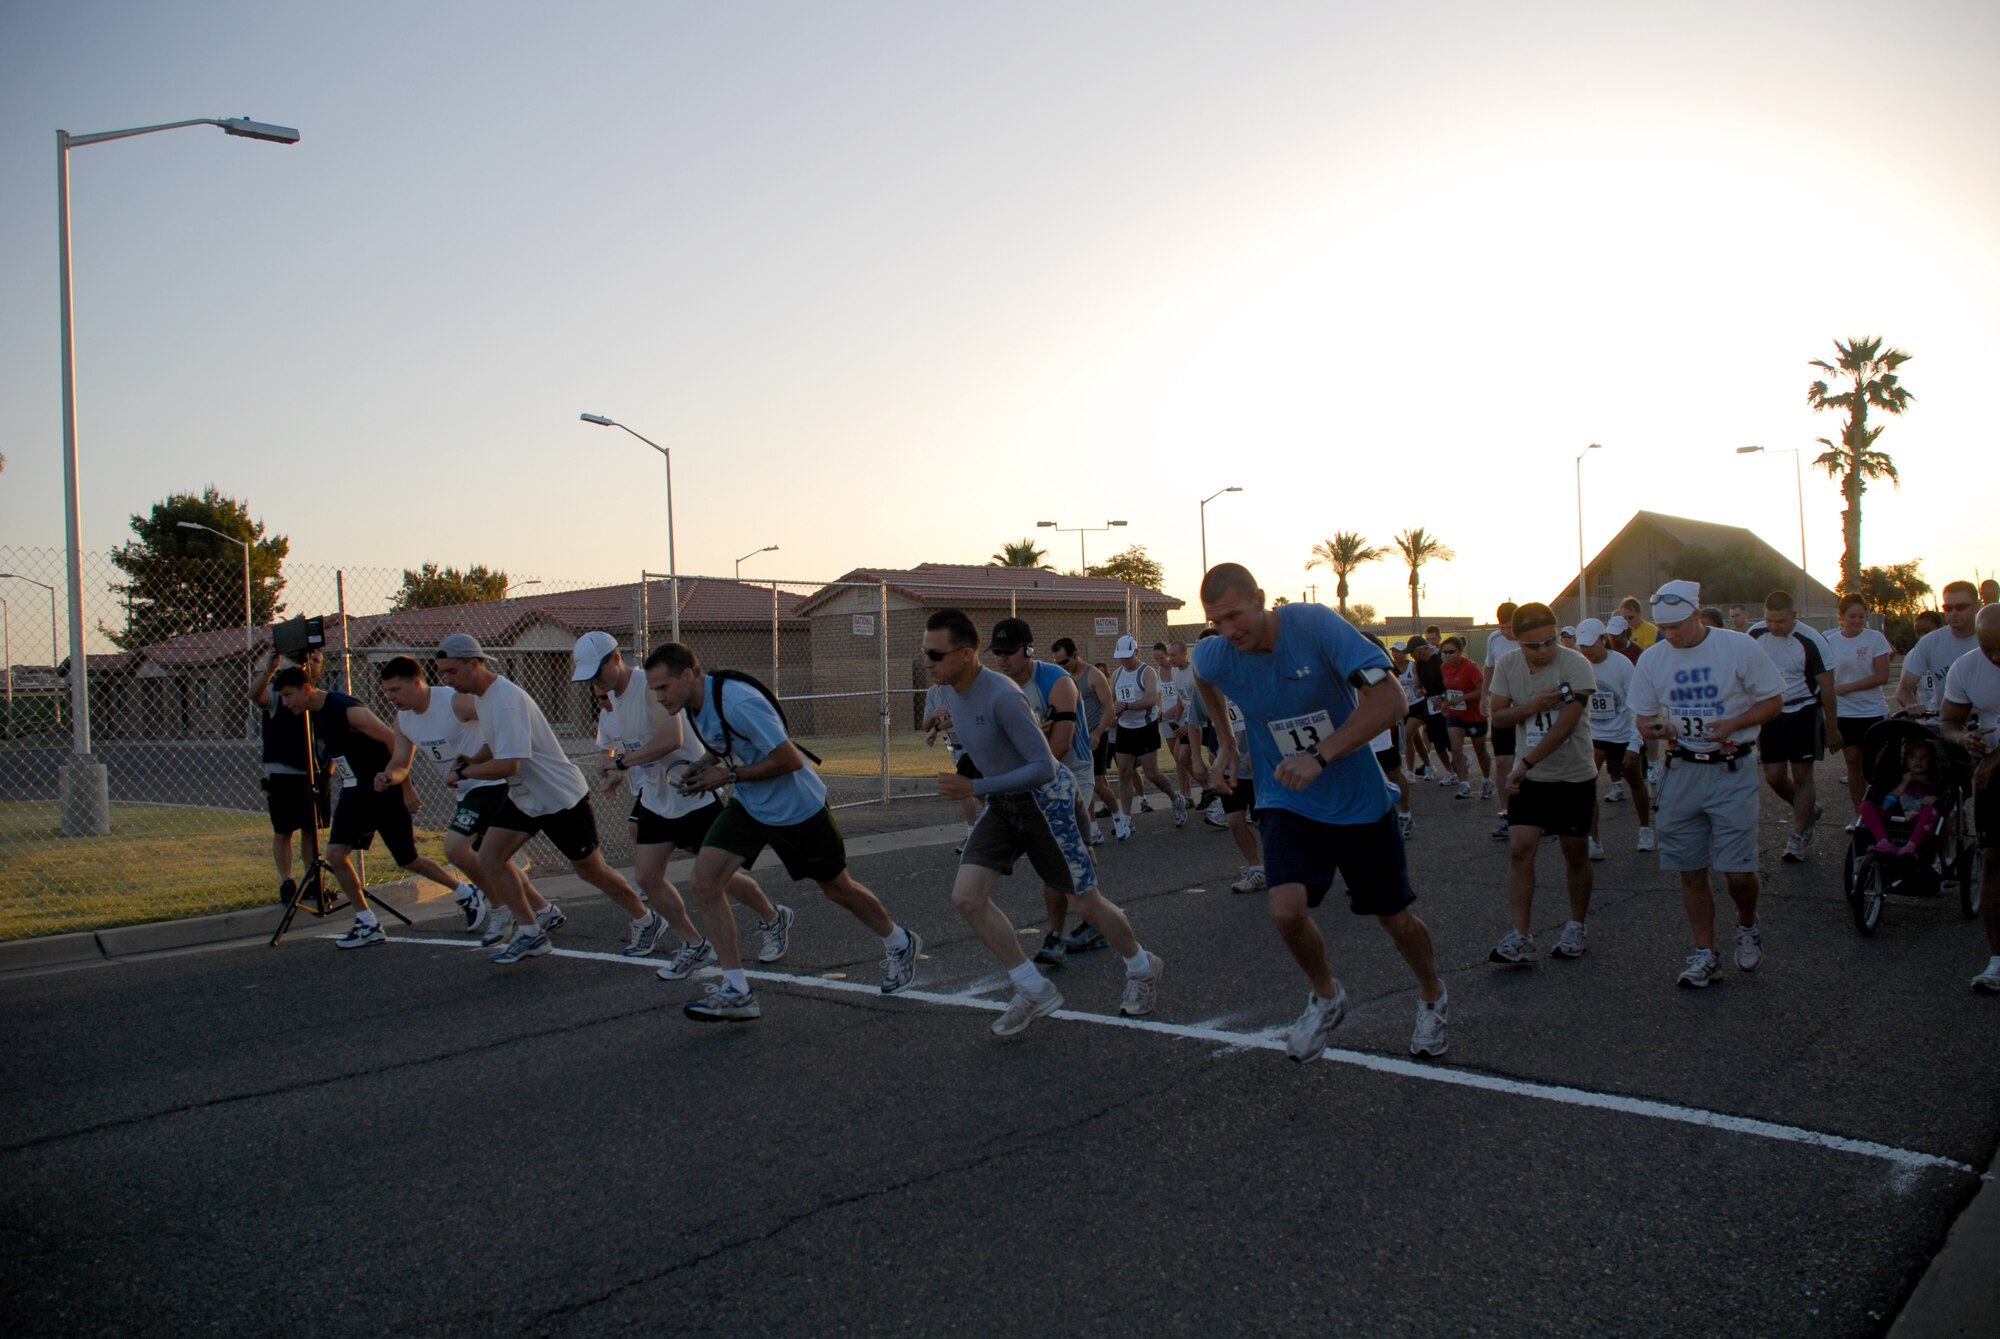 Luke Airmen begin to run the 13.2 mile marathon held at the Base Fitness Center, May 3. The half marathon consisted of more than 50 Airmen, retirees, and children from Luke Air Force Base who ran more than 660 miles combined. (U.S. Air Force photo/Airman 1st Class Tracie Forte)